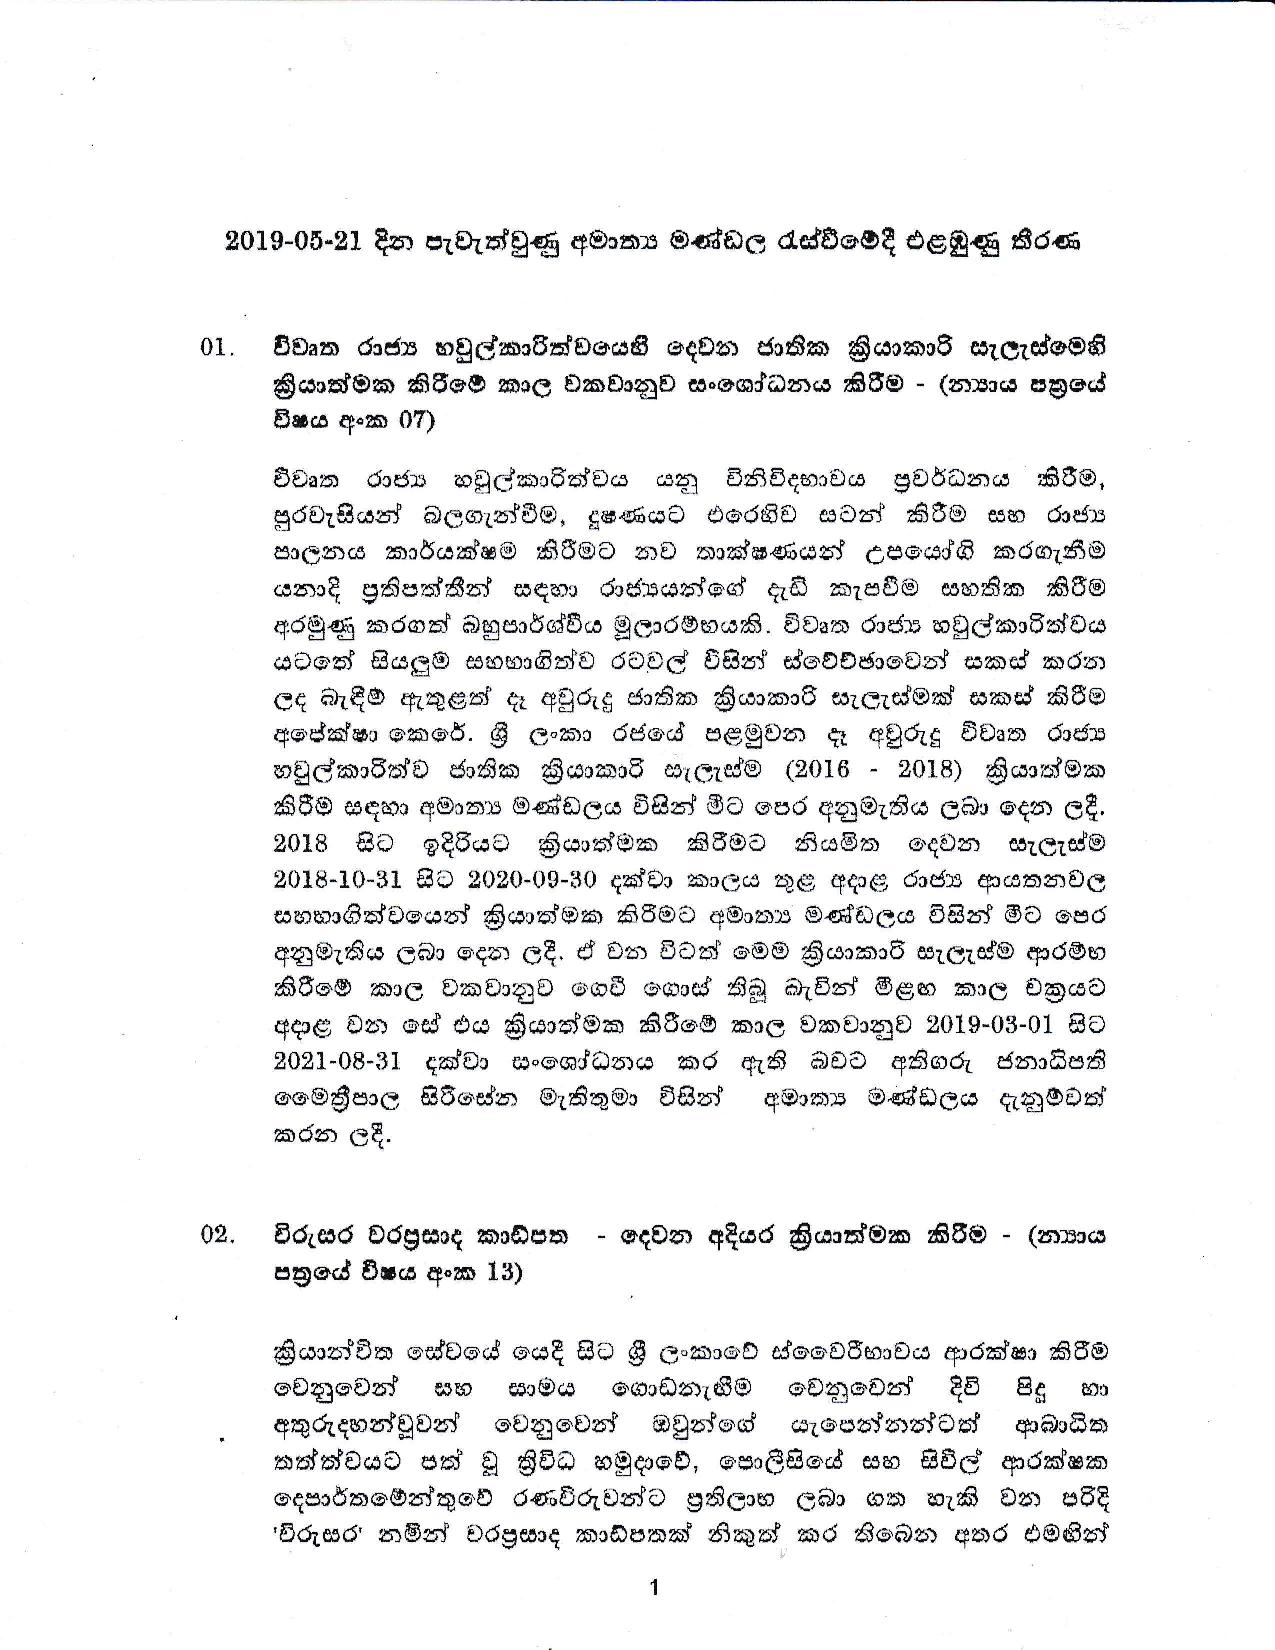 Cabinet Decision on 21.05.2019 page 001